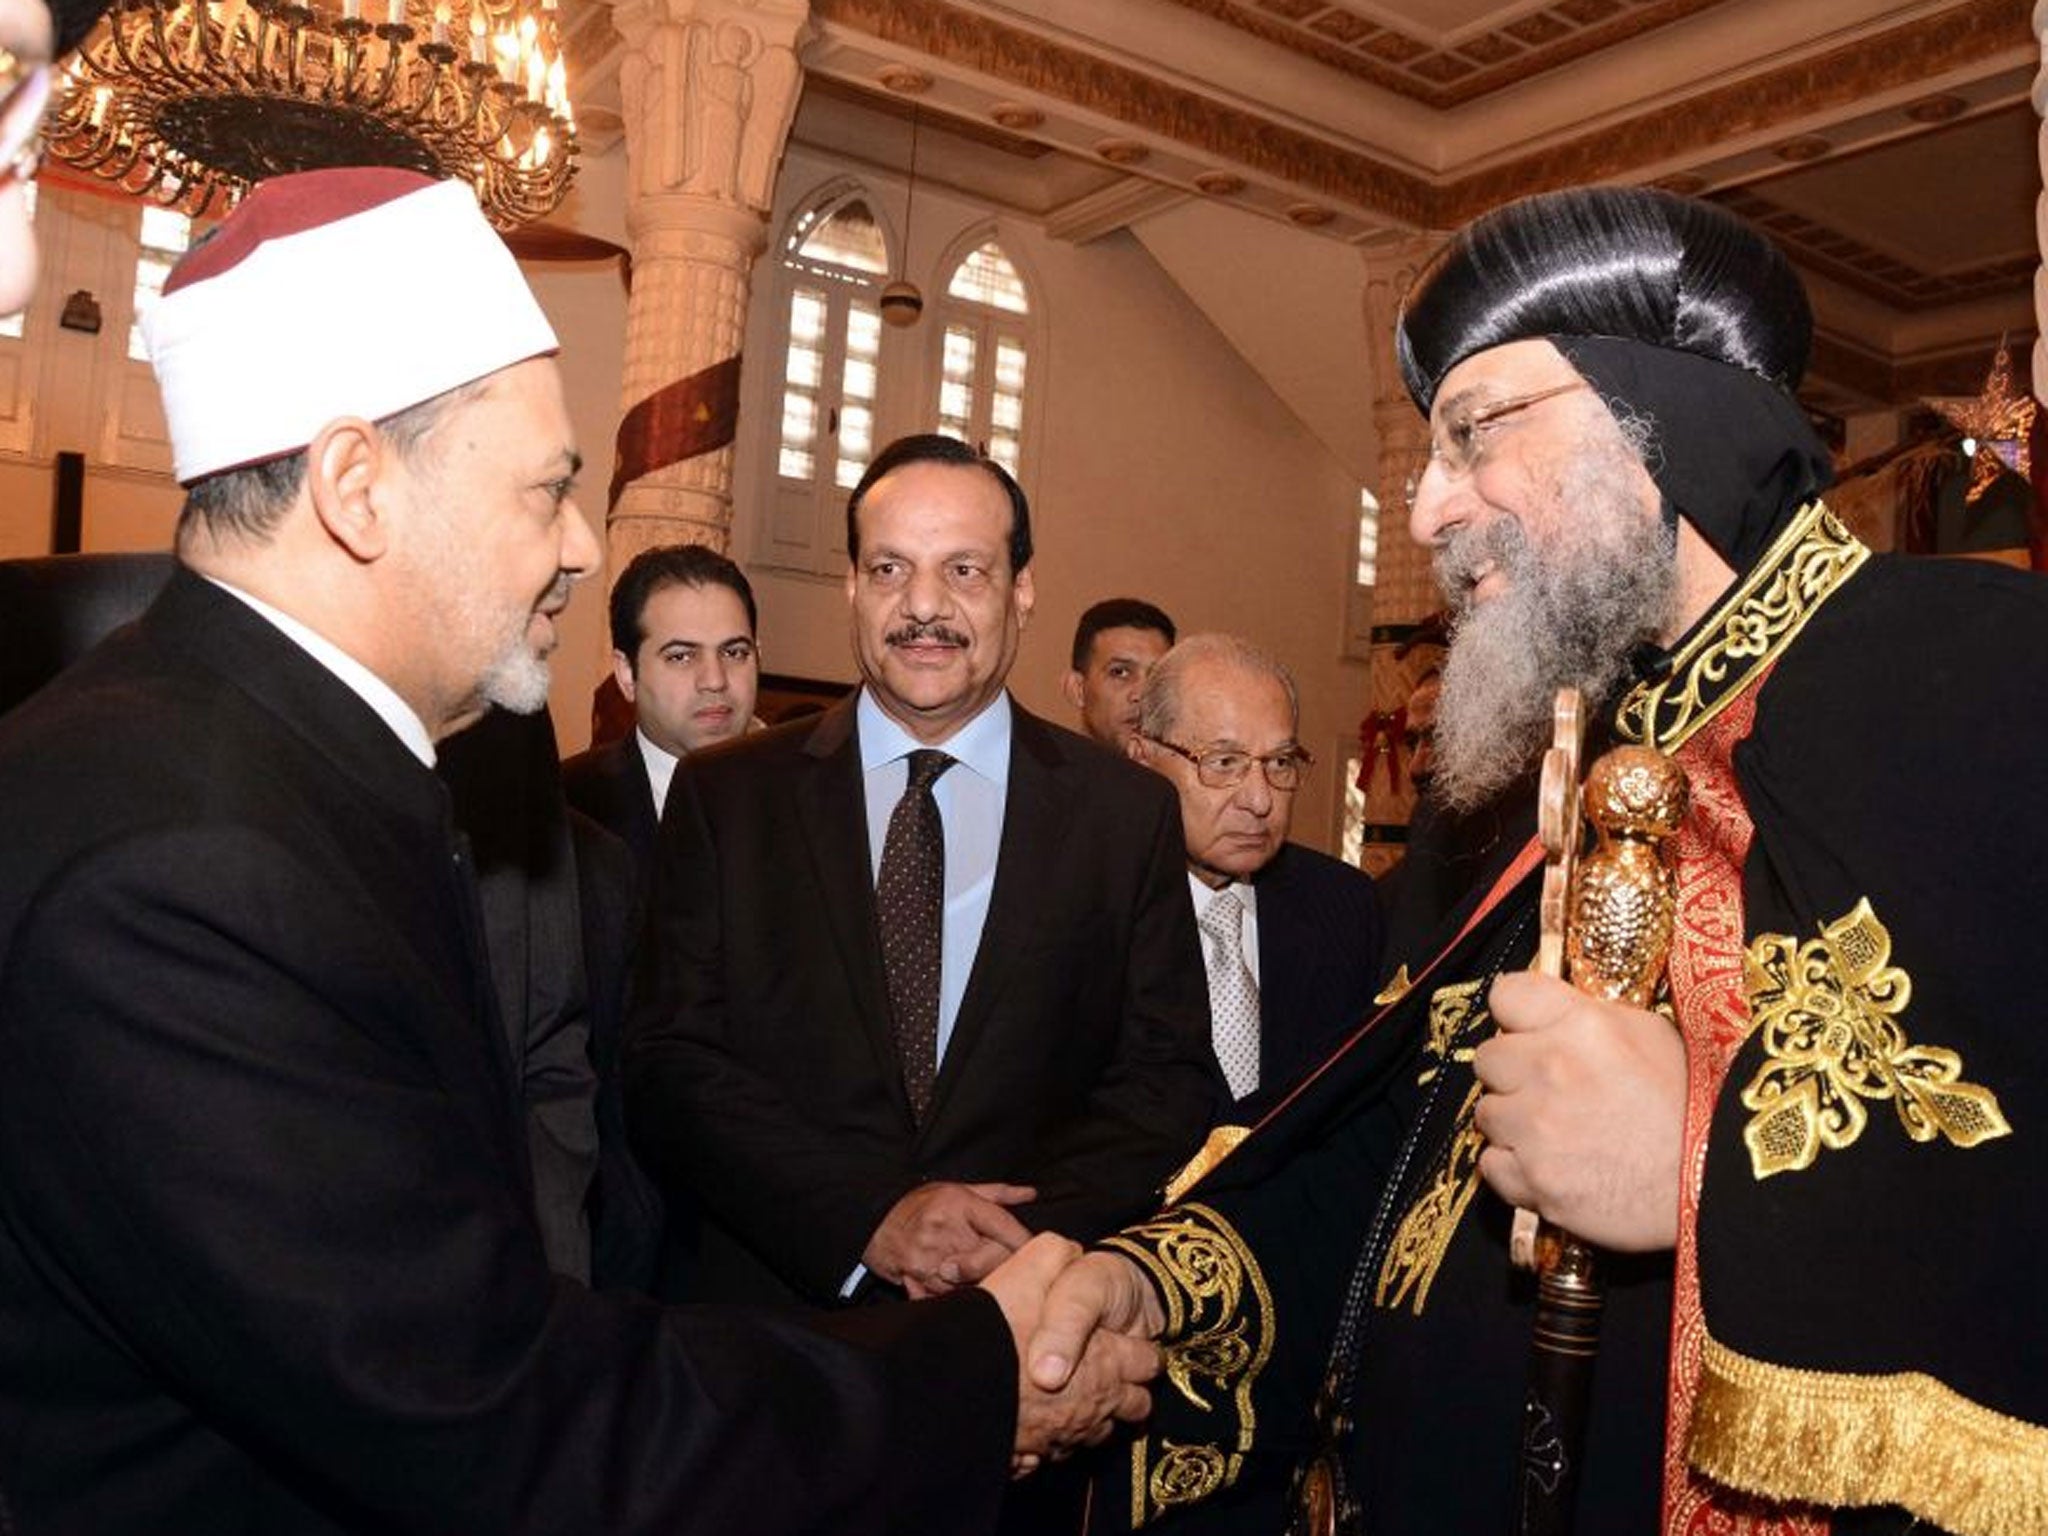 Leader of the Egyptian Coptic Orthodox Church, Pope Tawadros II (right), welcomes Grand Imam of Al-Azhar, Sheikh Ahmed el-Tayeb, in Cairo, Egypt